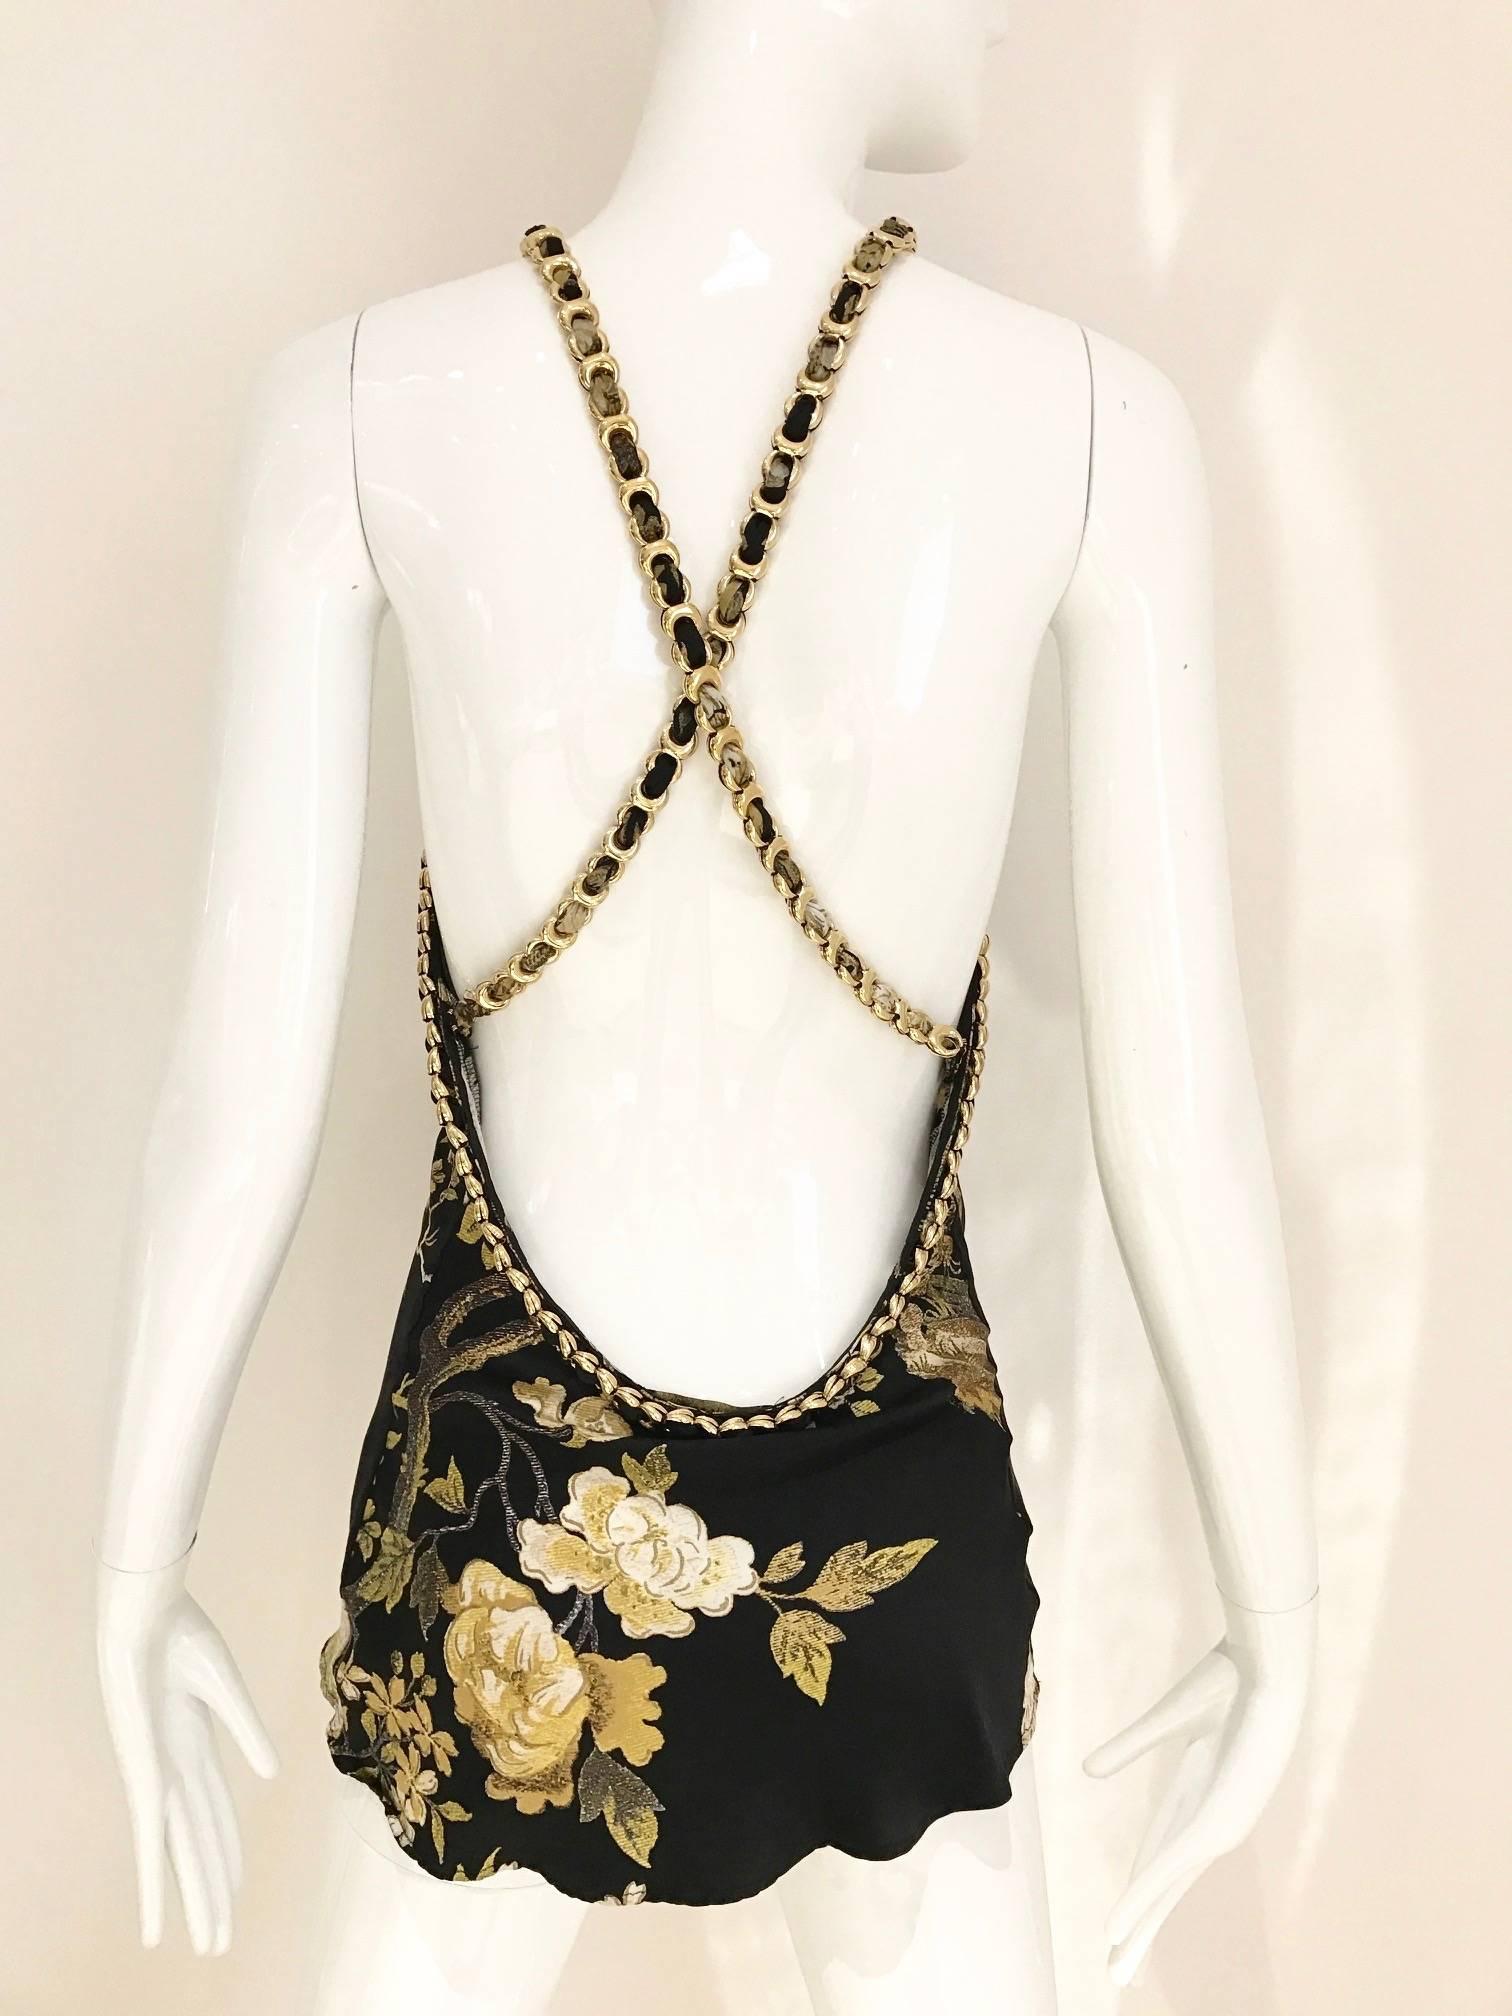 Beautiful silk charmeuse print roberto Cavalli Halter top in gold chain strap with exposed bare back. 
Fit size 4/ SMALL
Bust: 34 inch

***All Clothing has been professionally Dry Cleaned and ready to wear.